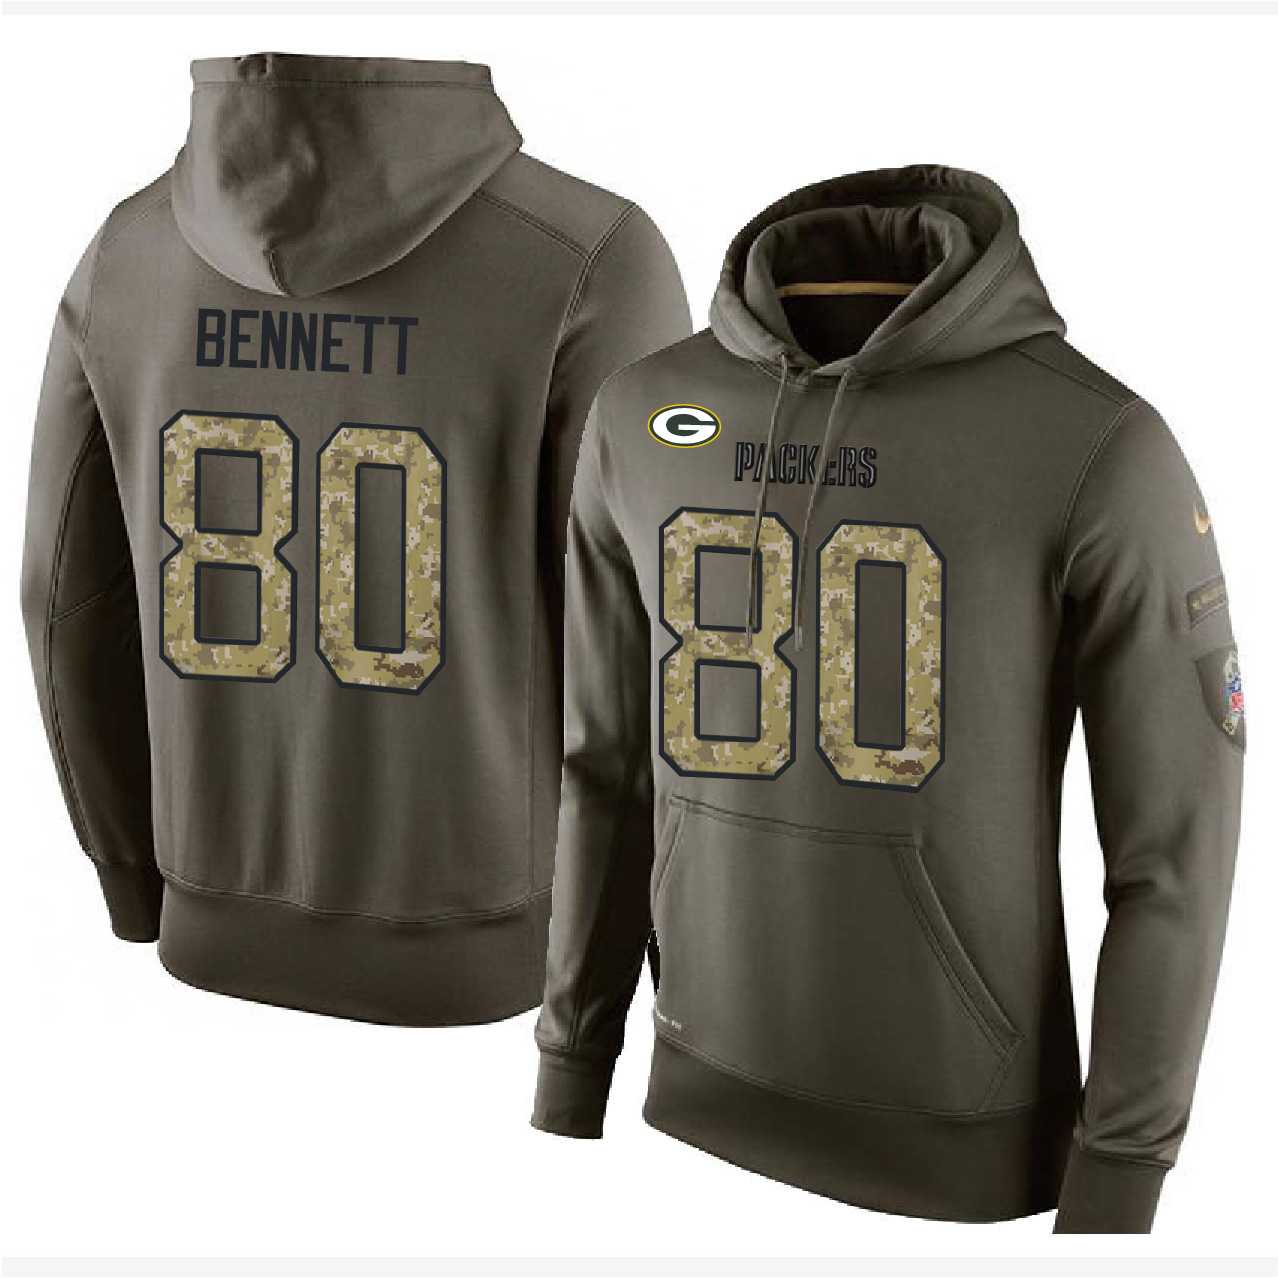 NFL Men's Nike Green Bay Packers #80 Martellus Bennett Stitched Green Olive Salute To Service KO Performance Hoodie